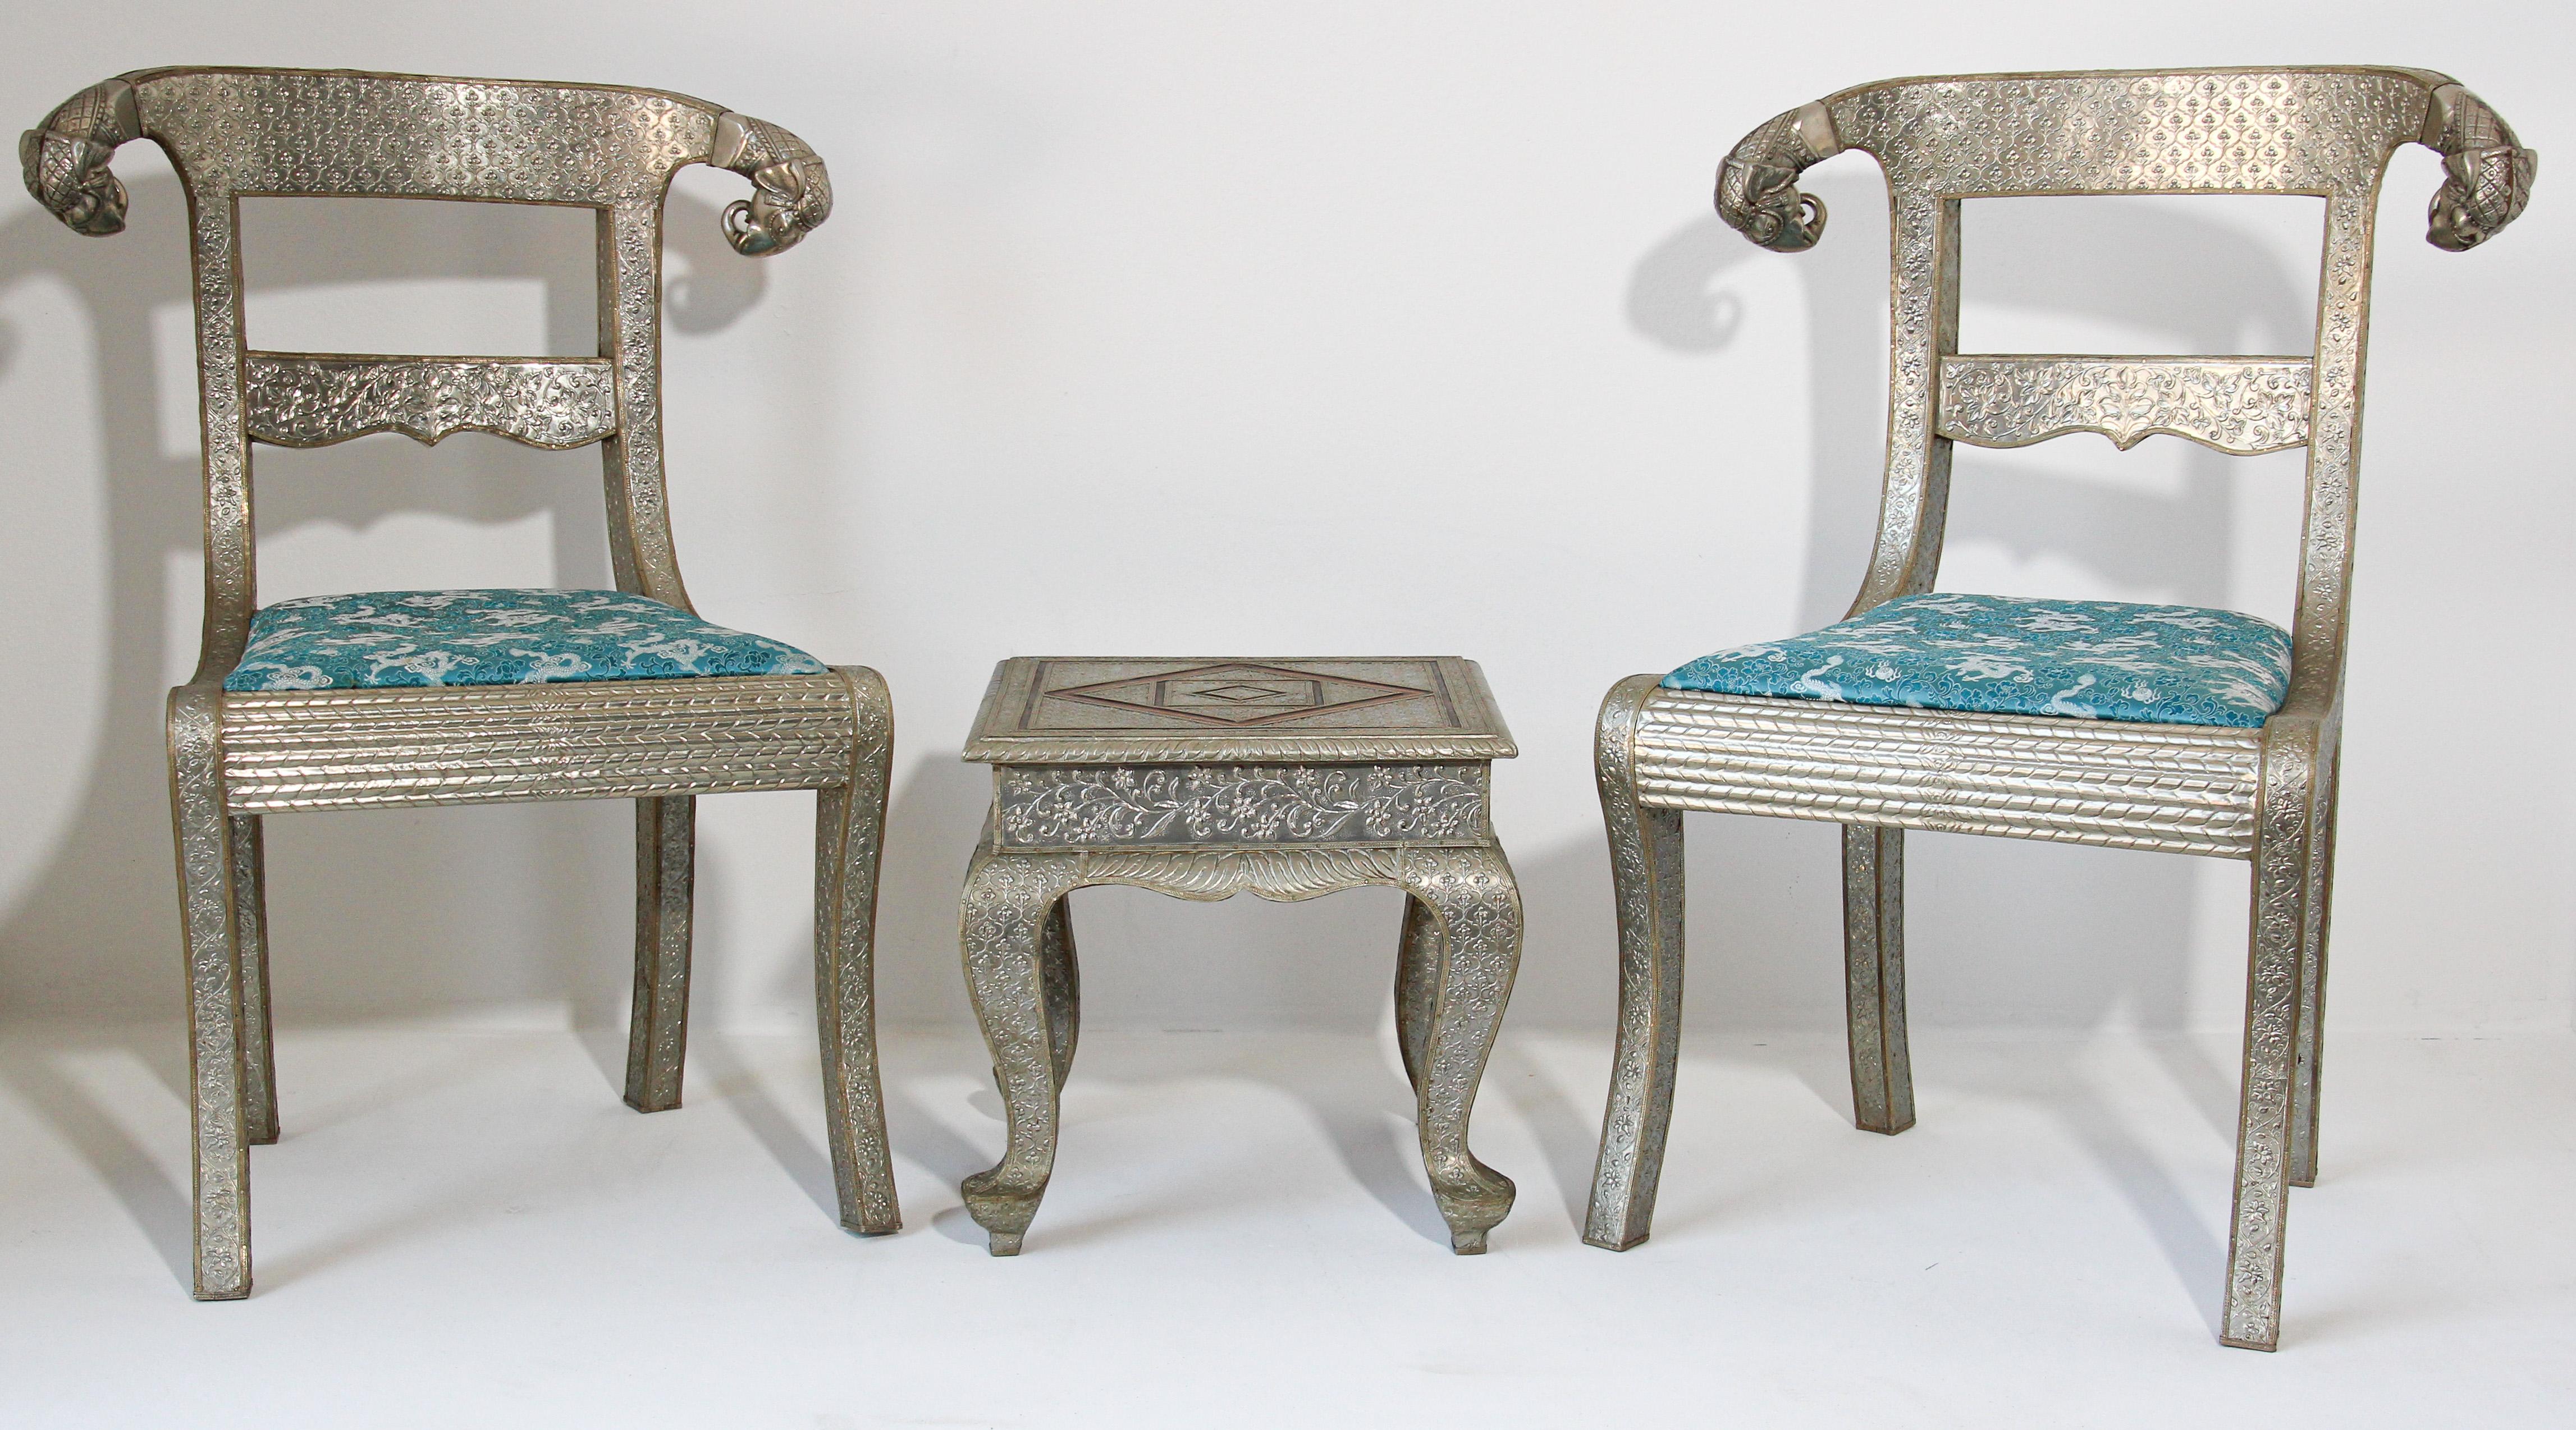 Set of Anglo-Indian silvered wrapped clad side chairs and table.
Anglo Raj wedding palace chair, hand-hammered with repousse silver metal work over wood with carved elephant head finals and blue cushion, very nice and unusual.
Vintage Anglo-Indian